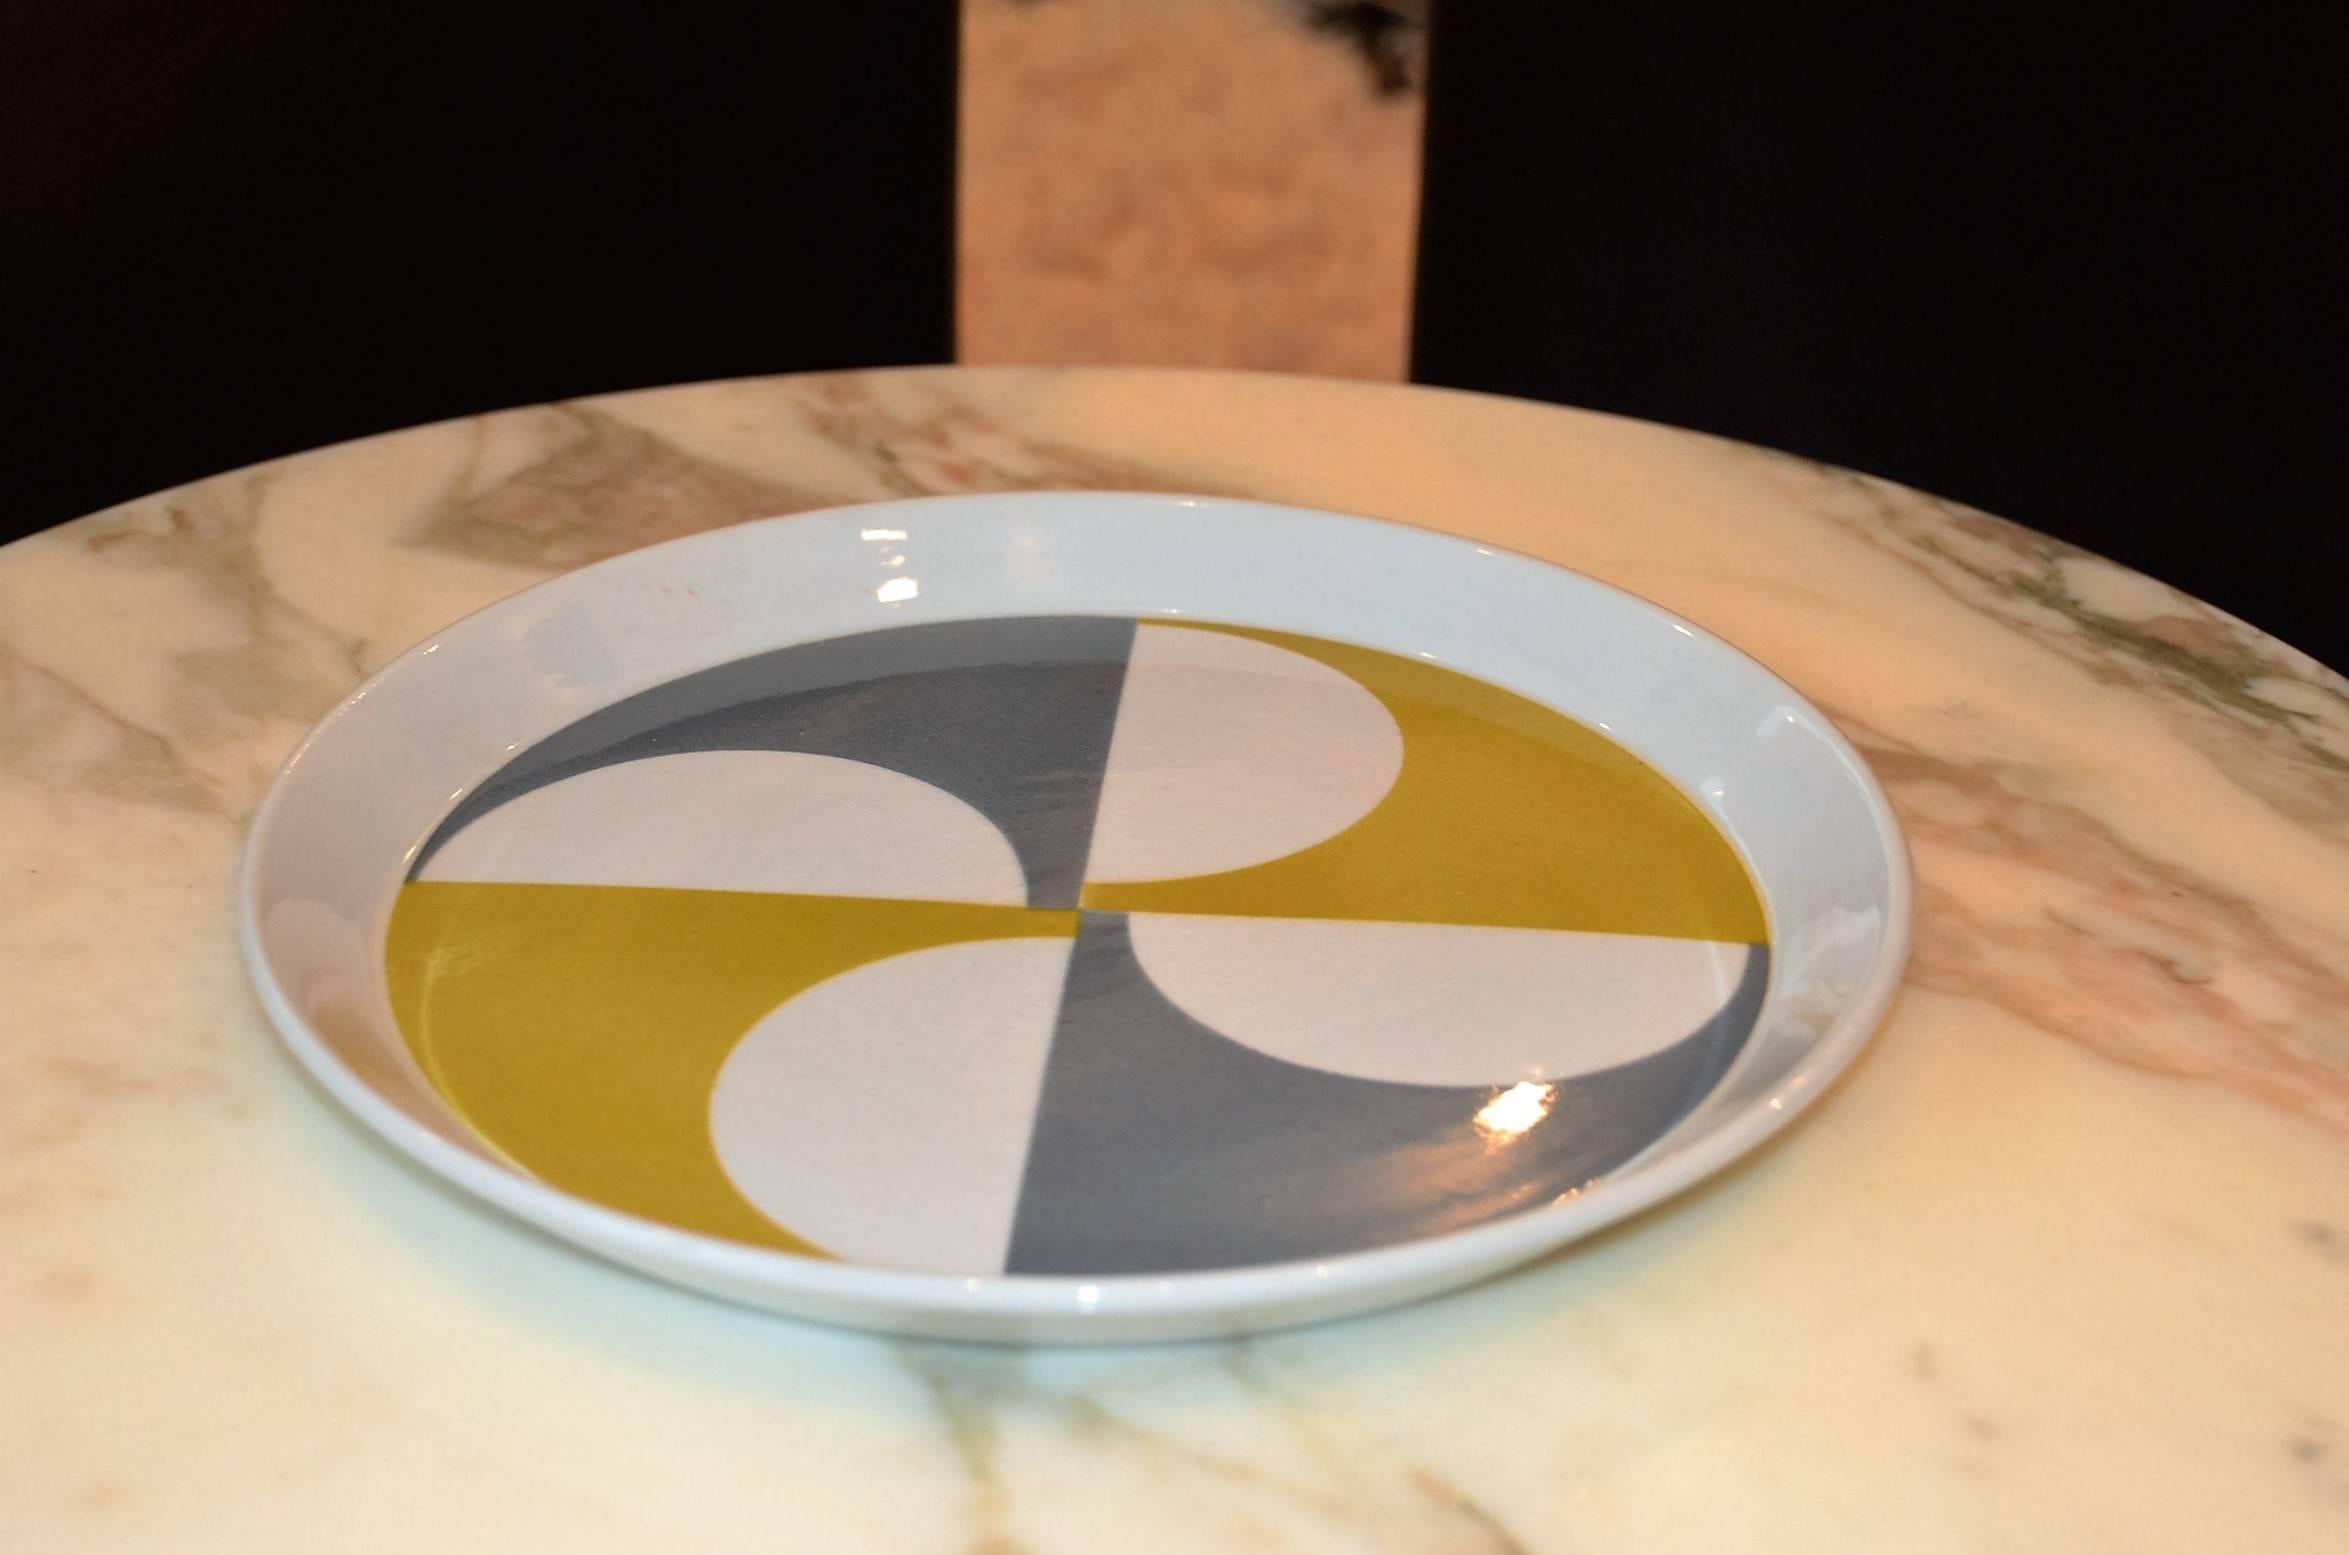 Italian Modernist Colorful Plate Designed by Gio Ponti Plate, Italy, 1960s